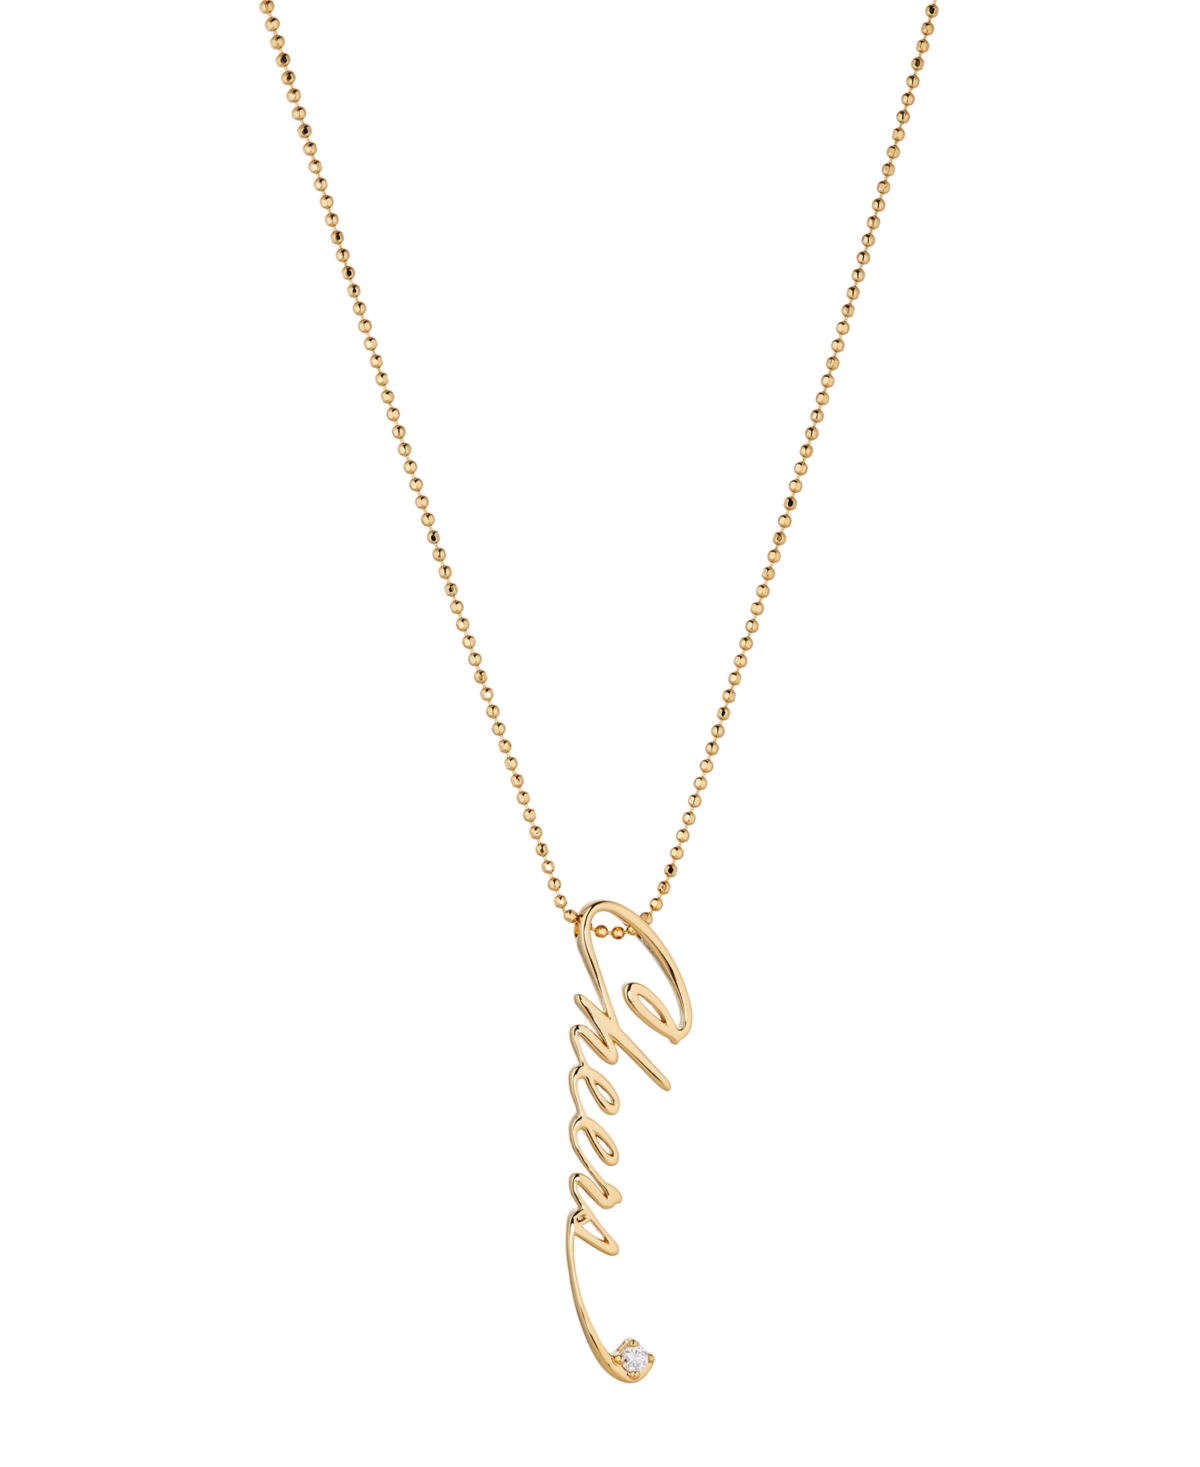 Script 'Cheers' Necklace in 18K Gold Plated Brass - K Gold Plated